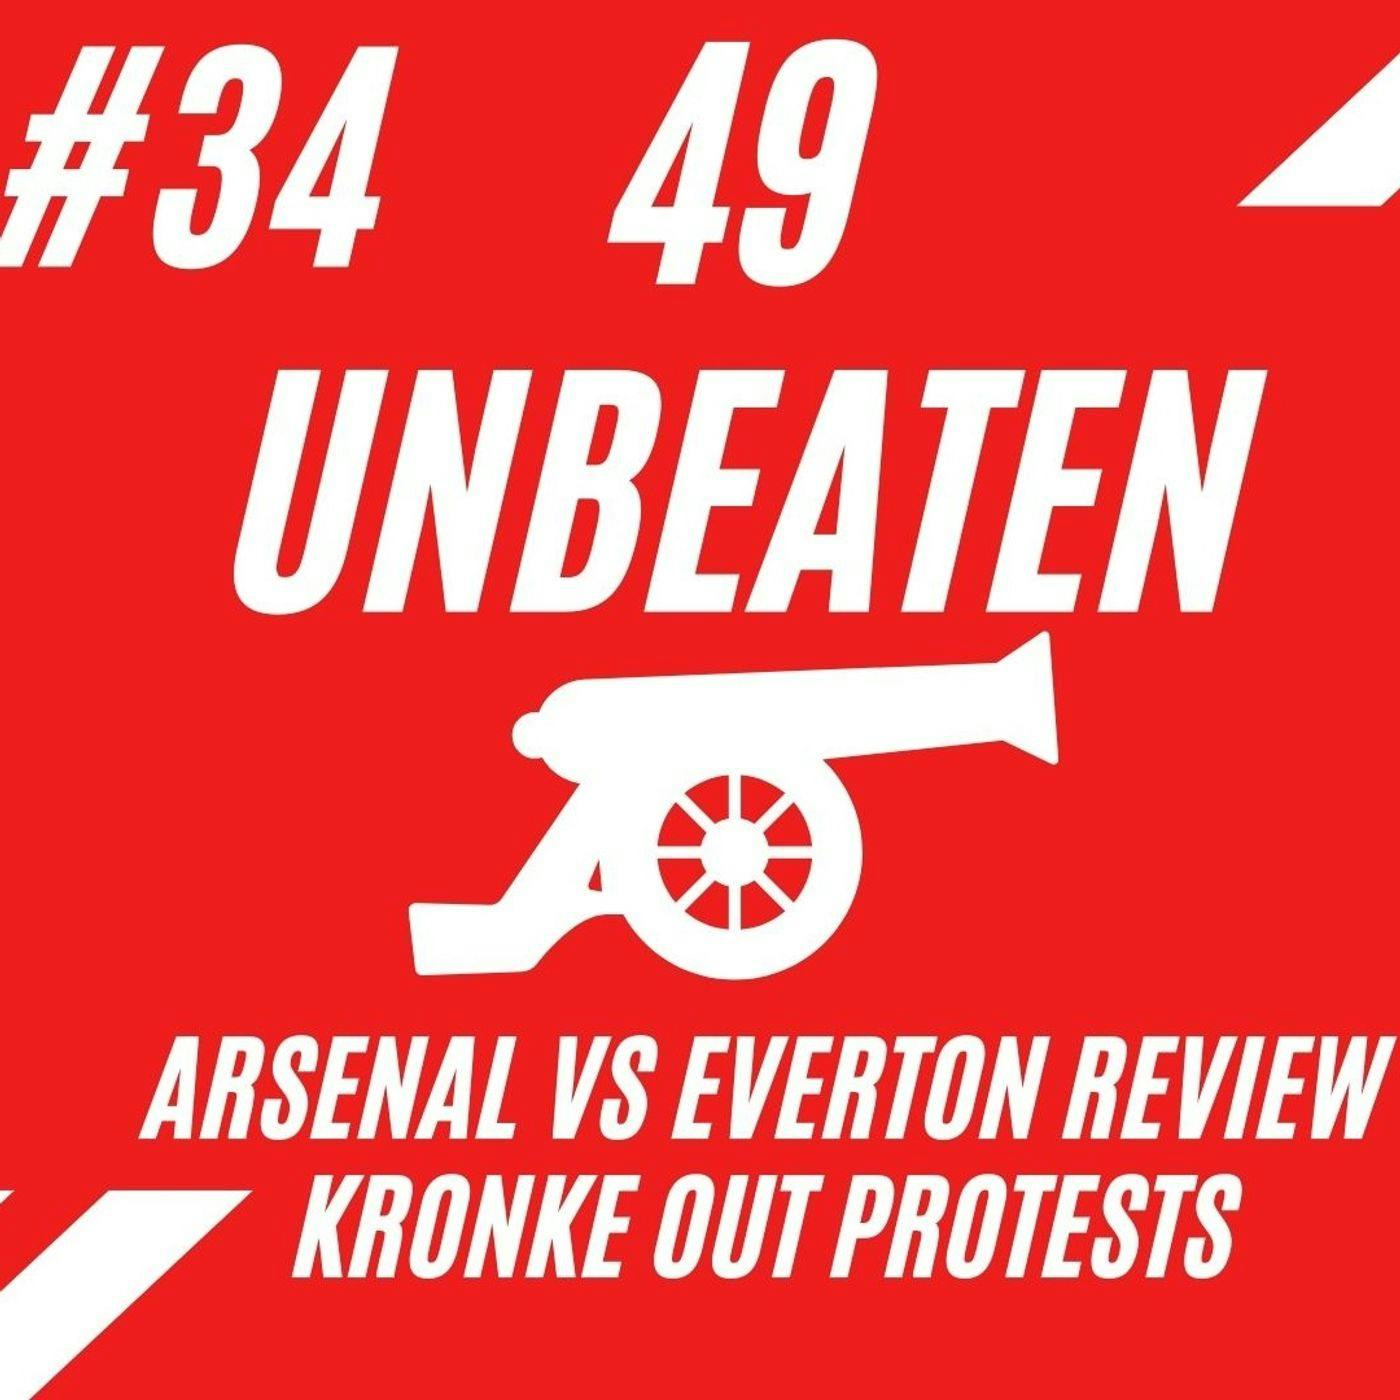 Everton Review and Kronke Out Protests